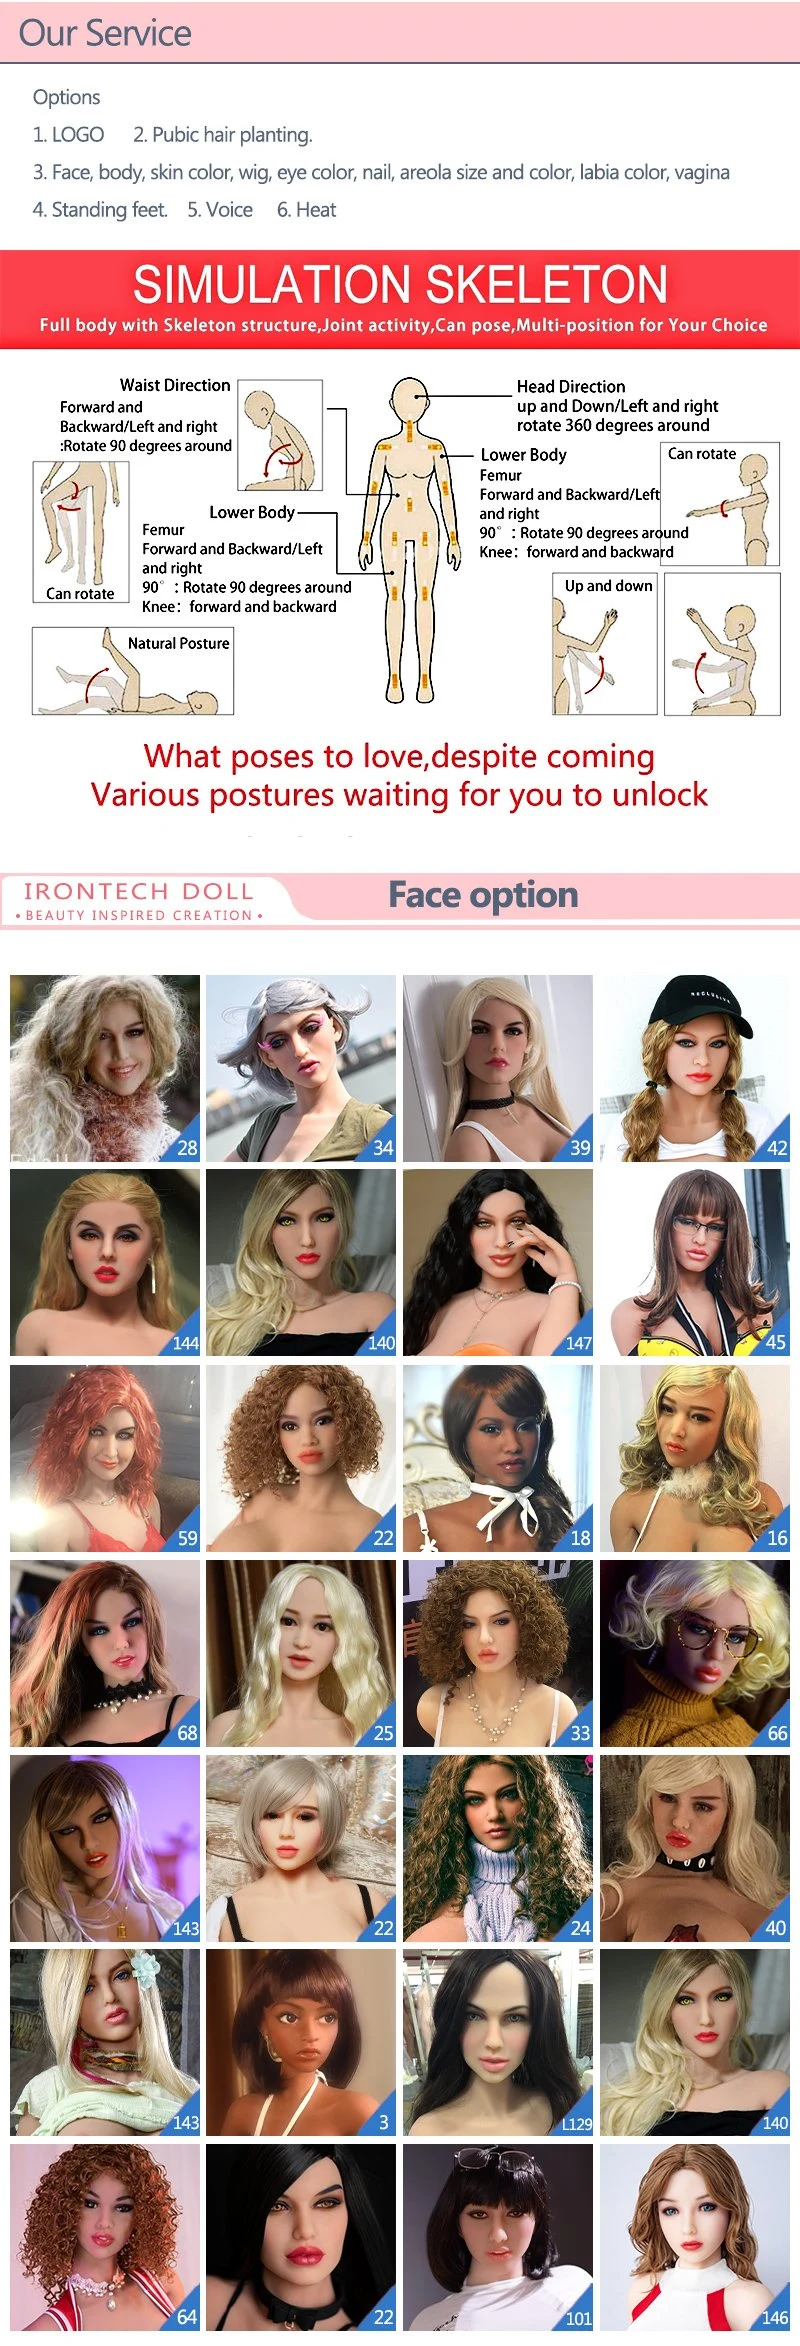 Multi Function Artificial Able Voice Customized Wholesale and Retail Realistic Girl Adult Sexy Product Sex Doll